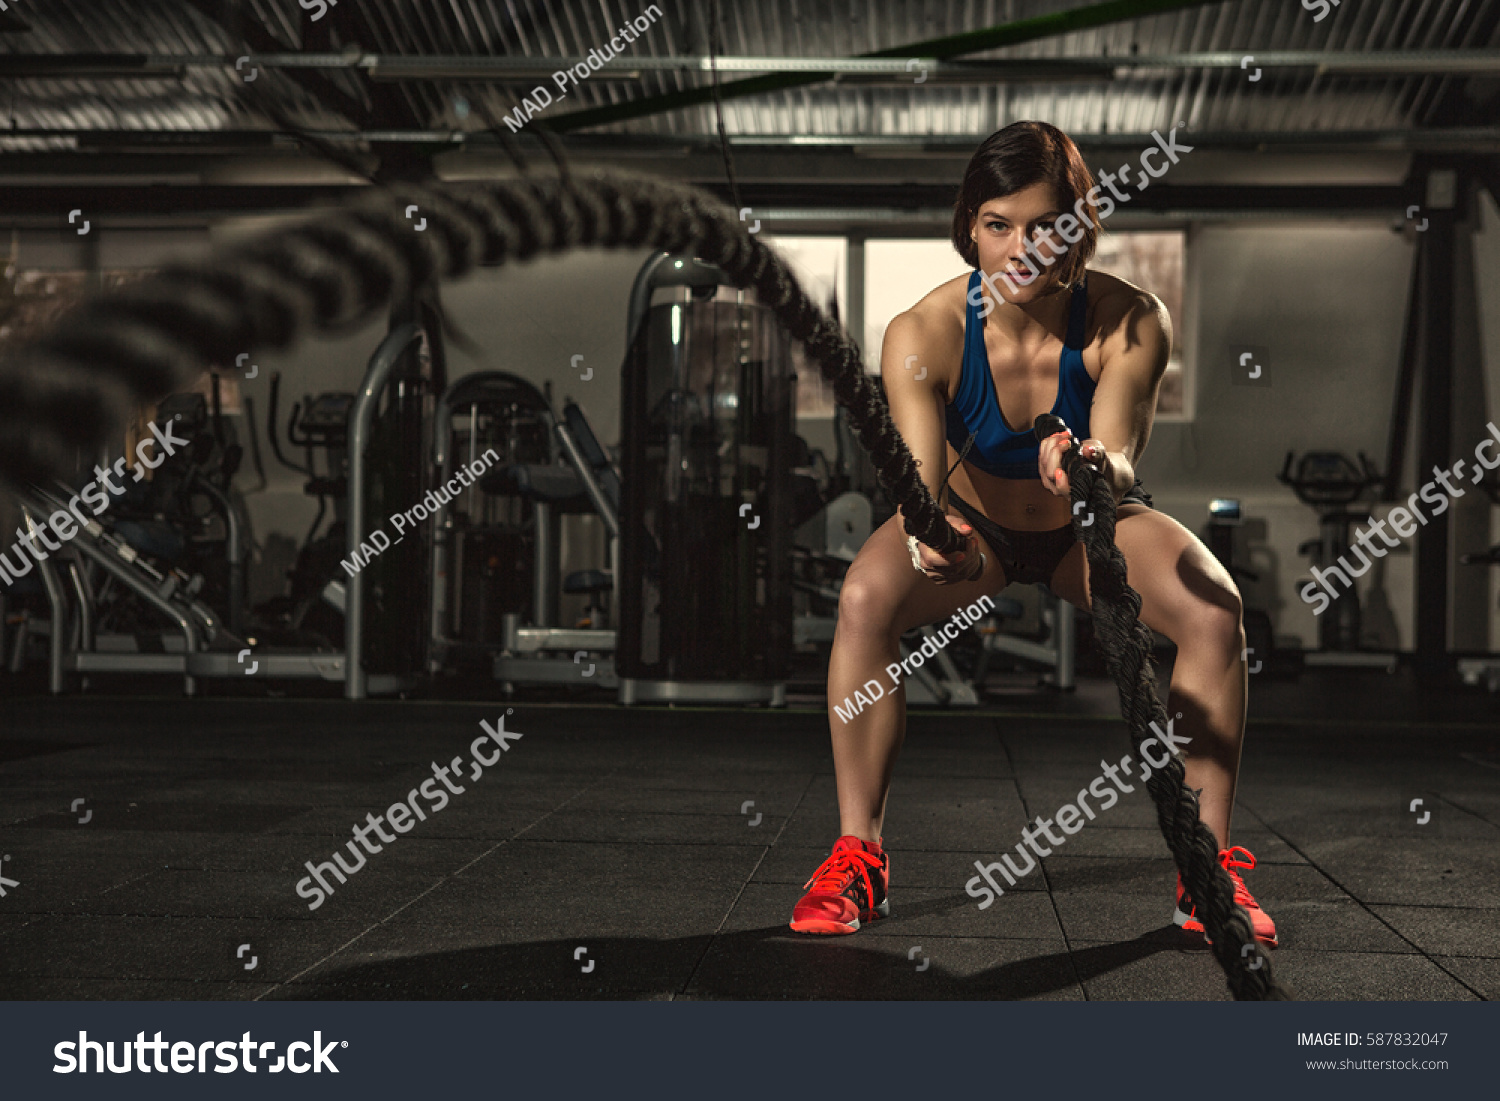 Battle ropes session. Attractive young fit and toned sportswoman working out in functional training gym doing crossfit exercise with battle ropes copyspace battling ropes cross-fit workout motivation #587832047